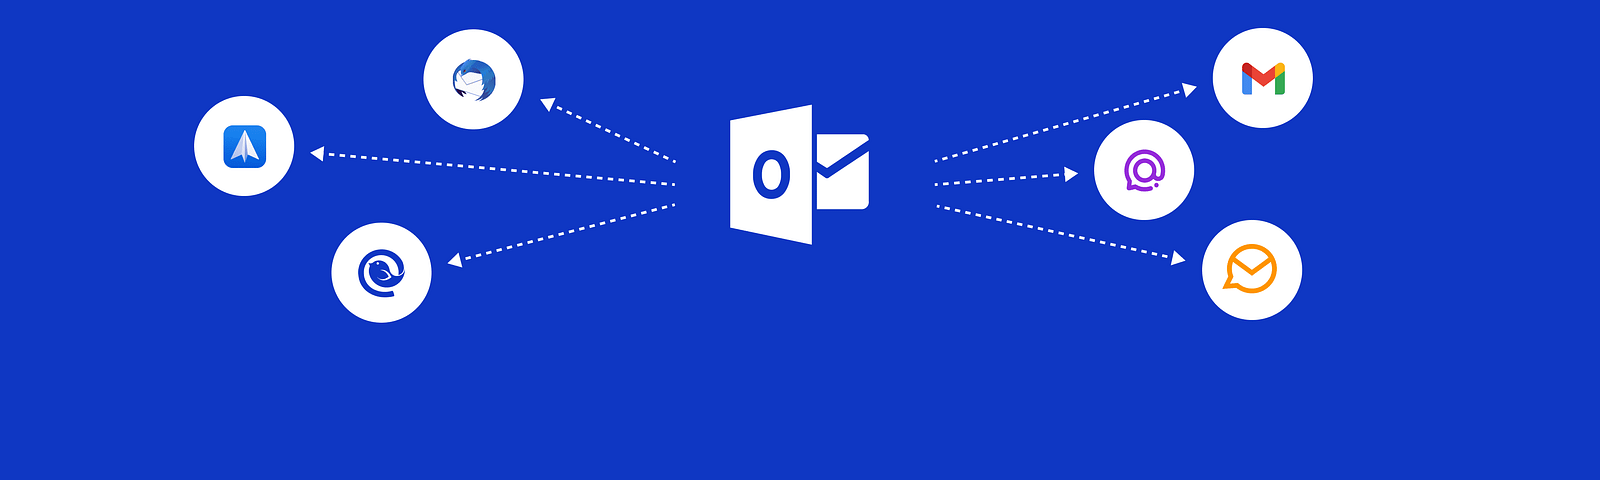 free email software like outlook for windows 8